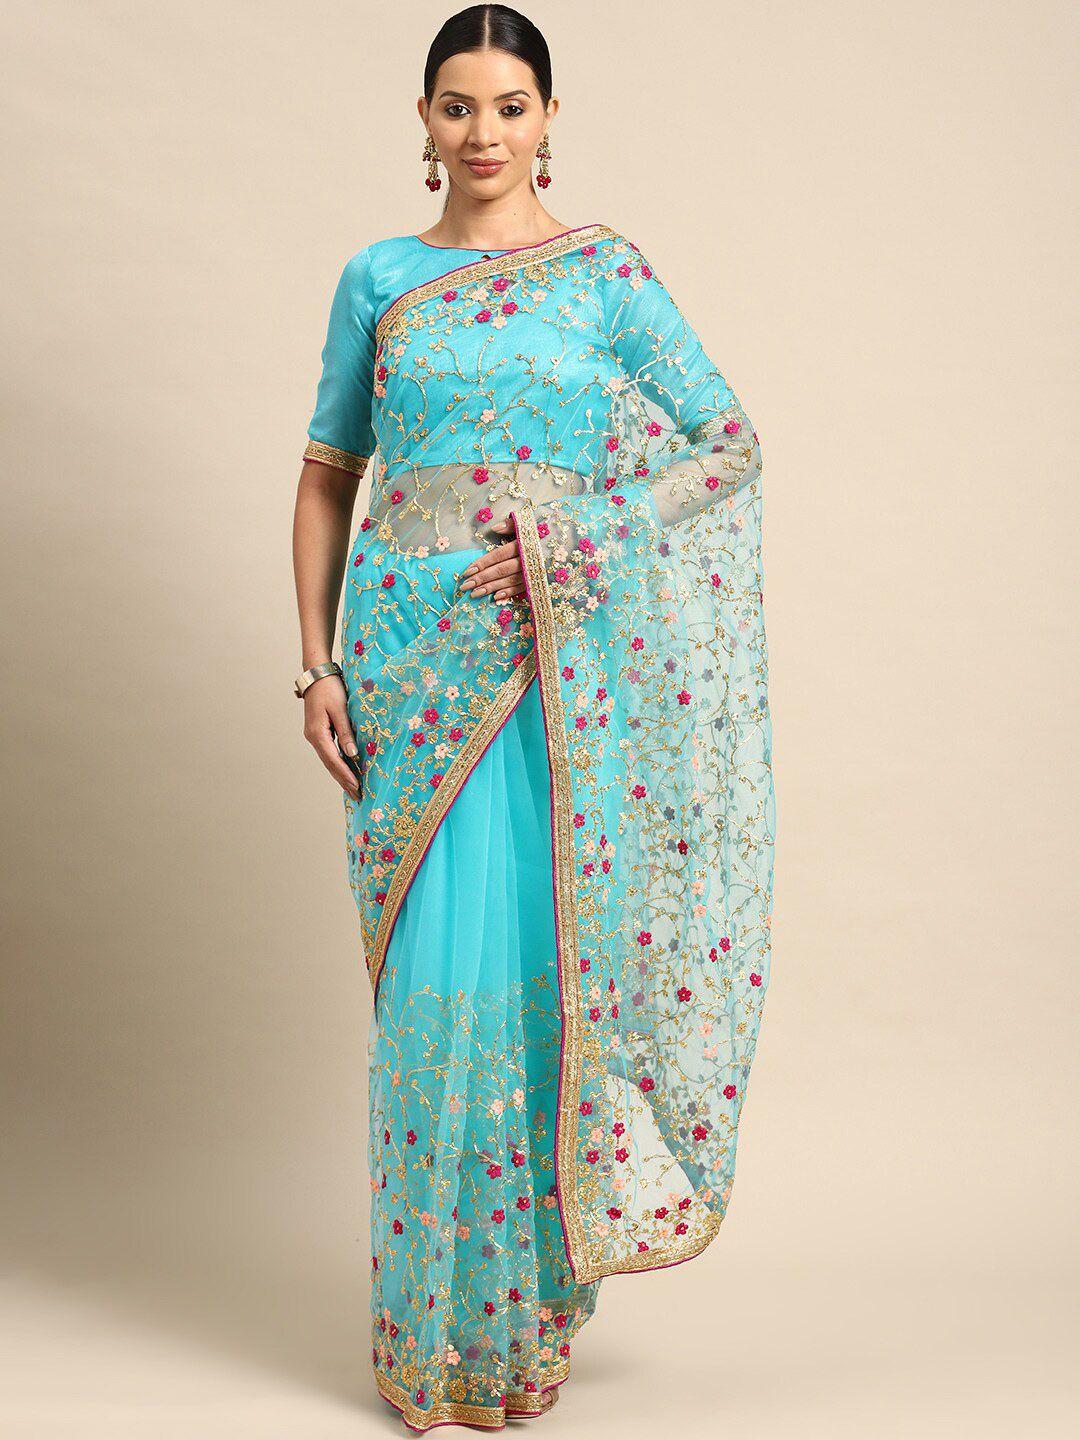 mitera turquoise blue & gold-toned floral embroidered net saree